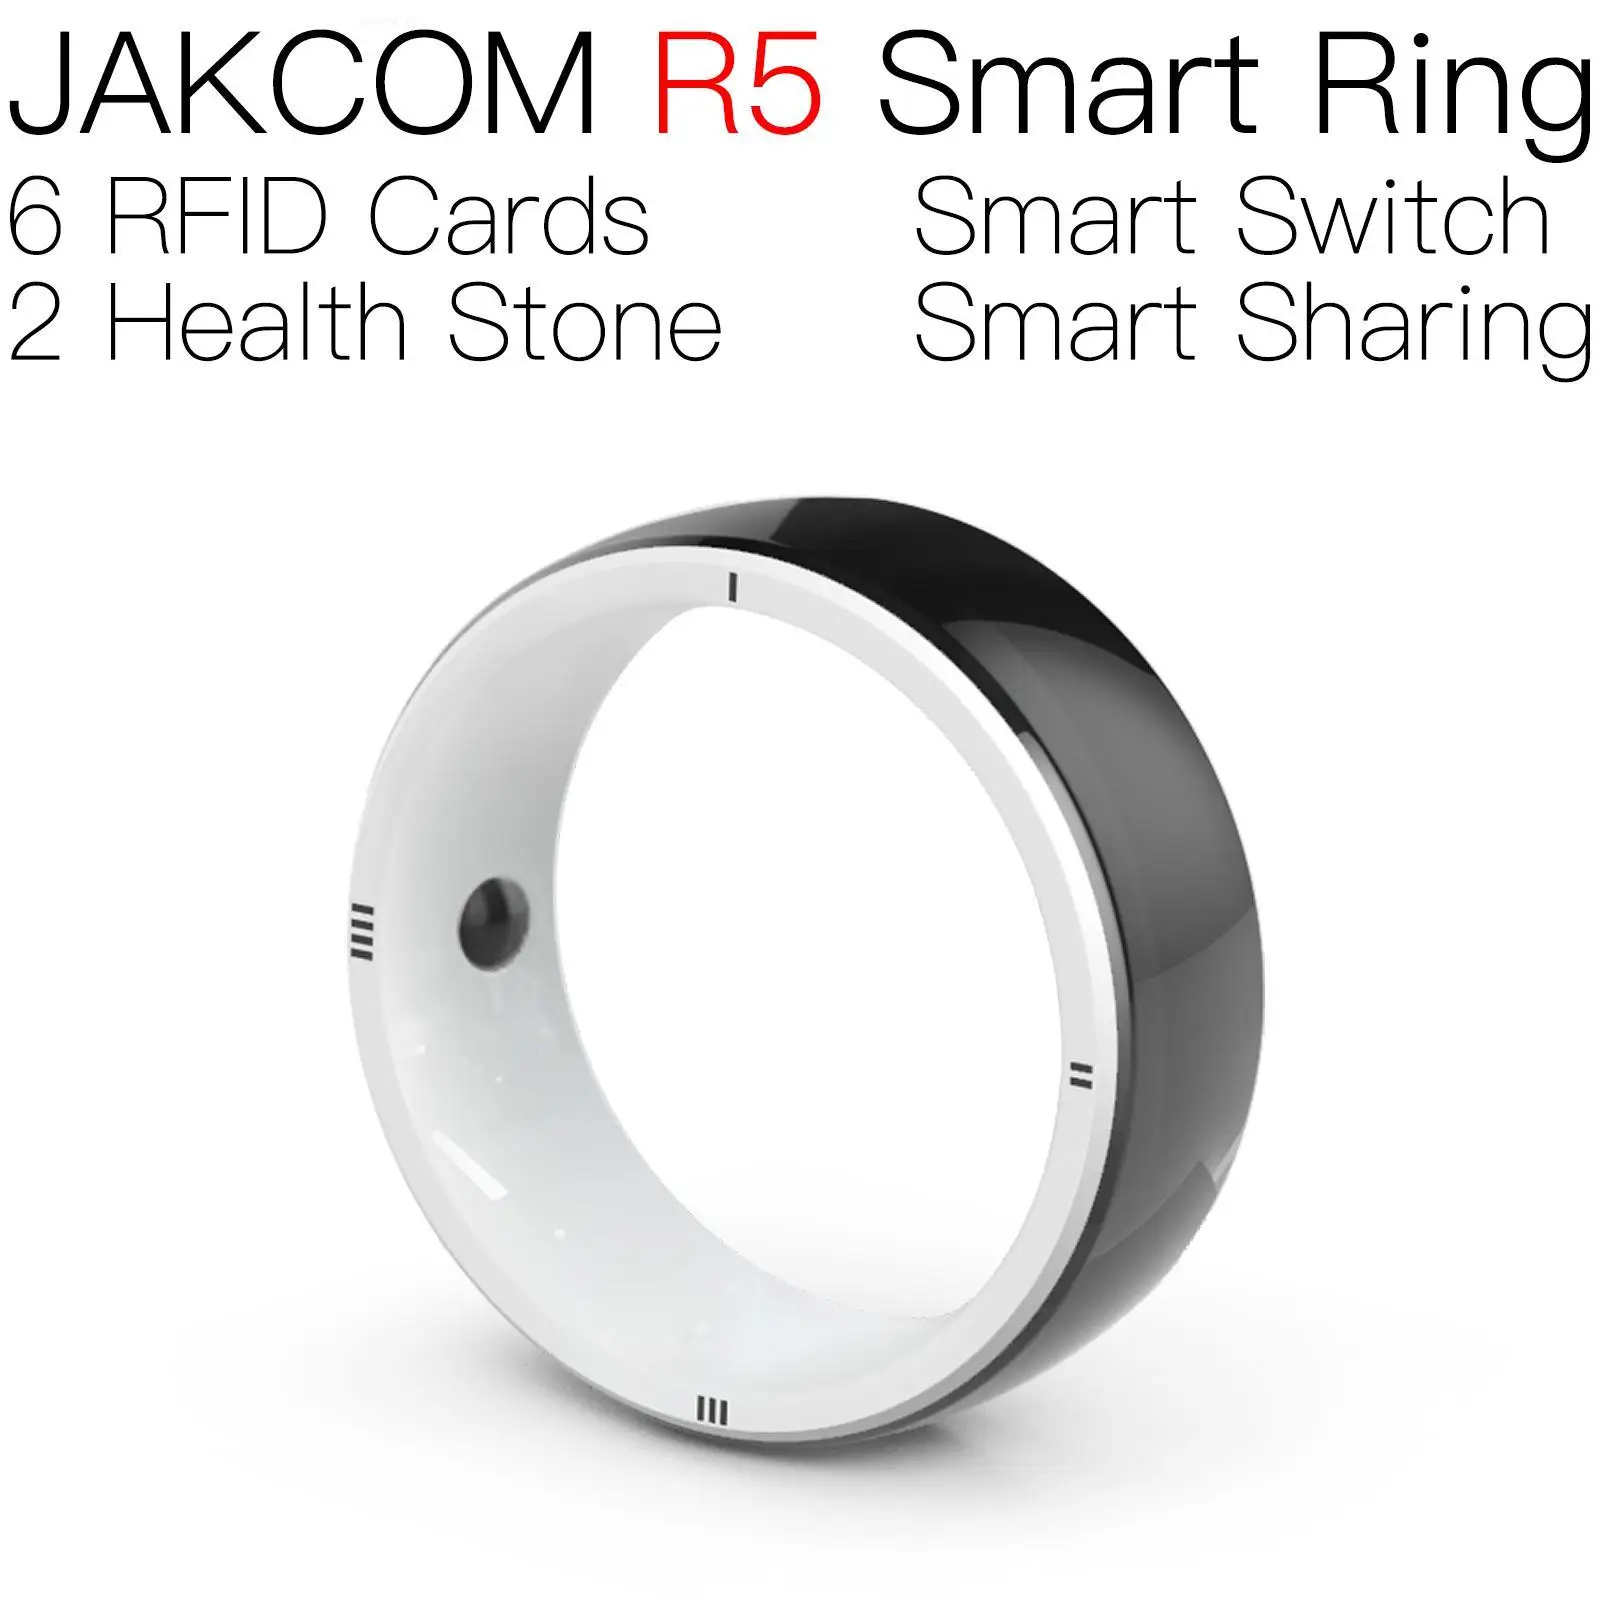 

JAKCOM R5 Smart Ring better than handmade labels tags rfid chip 125khz price tag electronic black key copy rewritable cards